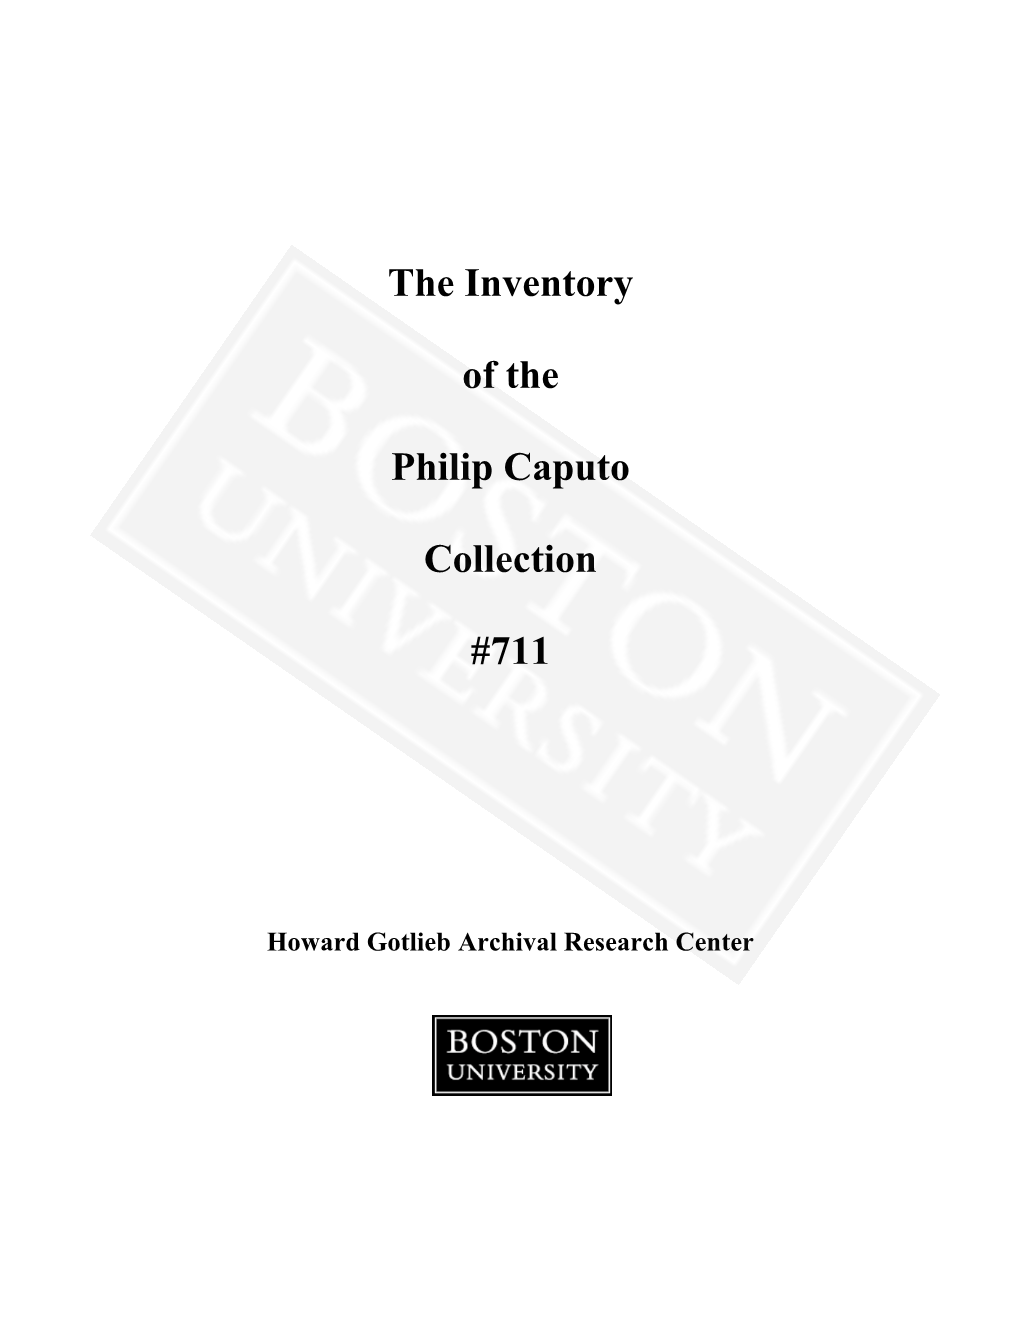 The Inventory of the Philip Caputo Collection #711